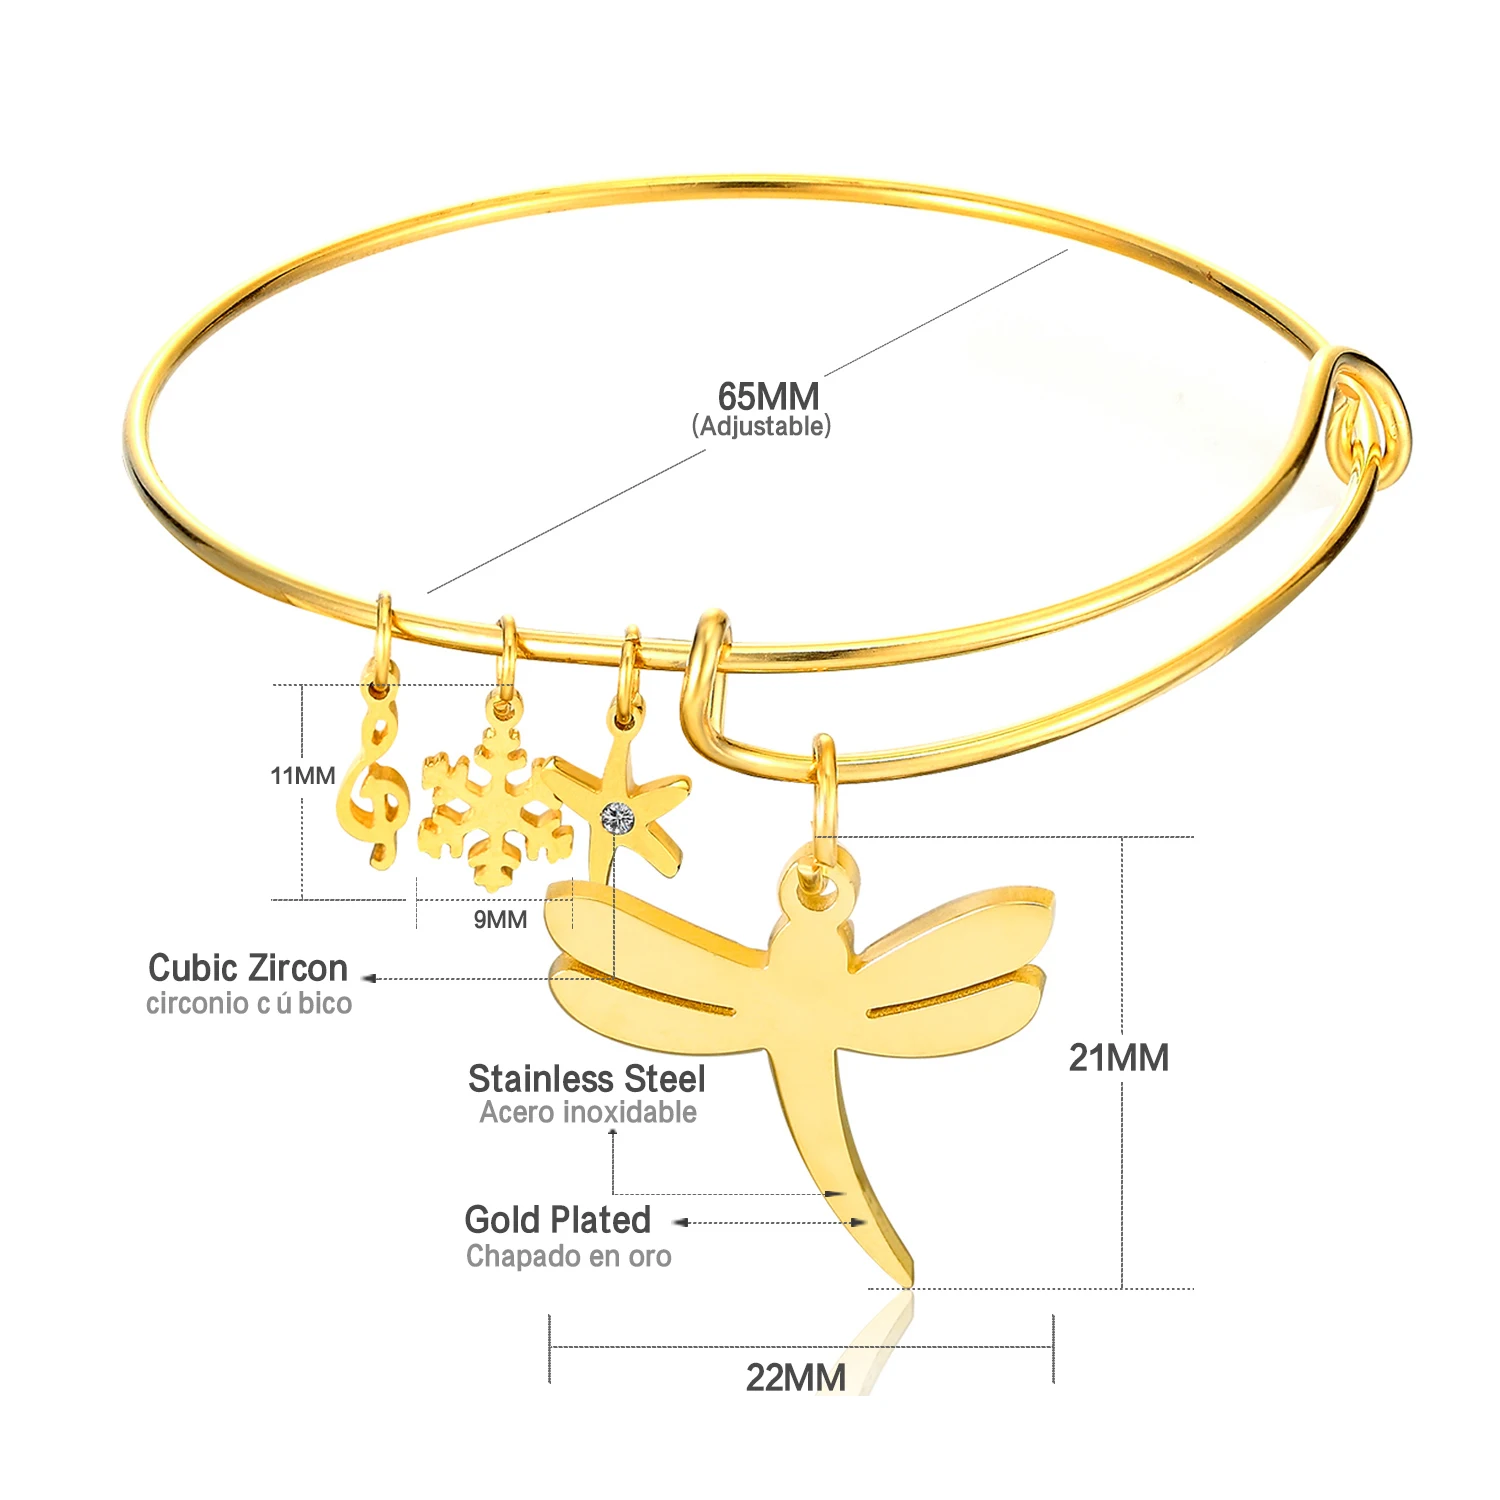 

Gold Plated bangle bracelet Trendy Summer Style Best Friends Pendant Women Jewelry Gift Adjustable Bangles, Gold/silver optional